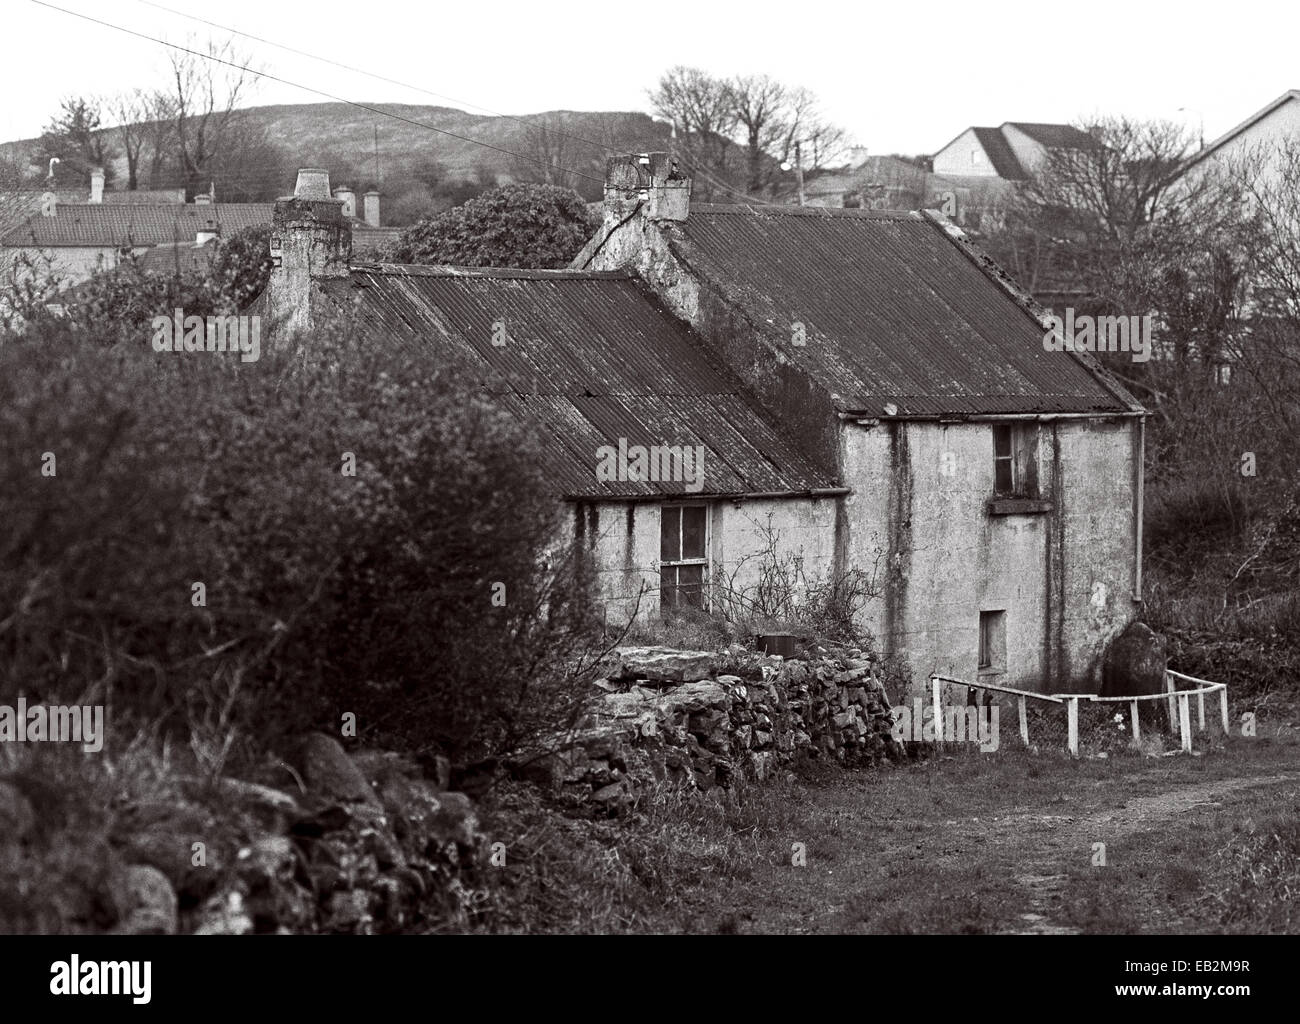 WORKERS COTTAGE ON THE OWENMORE RIVER, POLLEXFEN MILL, OWNED BY WILLIAM BUTLER YEATS GRANDFATHER,  BALLYSADARE, COUNTY SLIGO, IRELAND Stock Photo